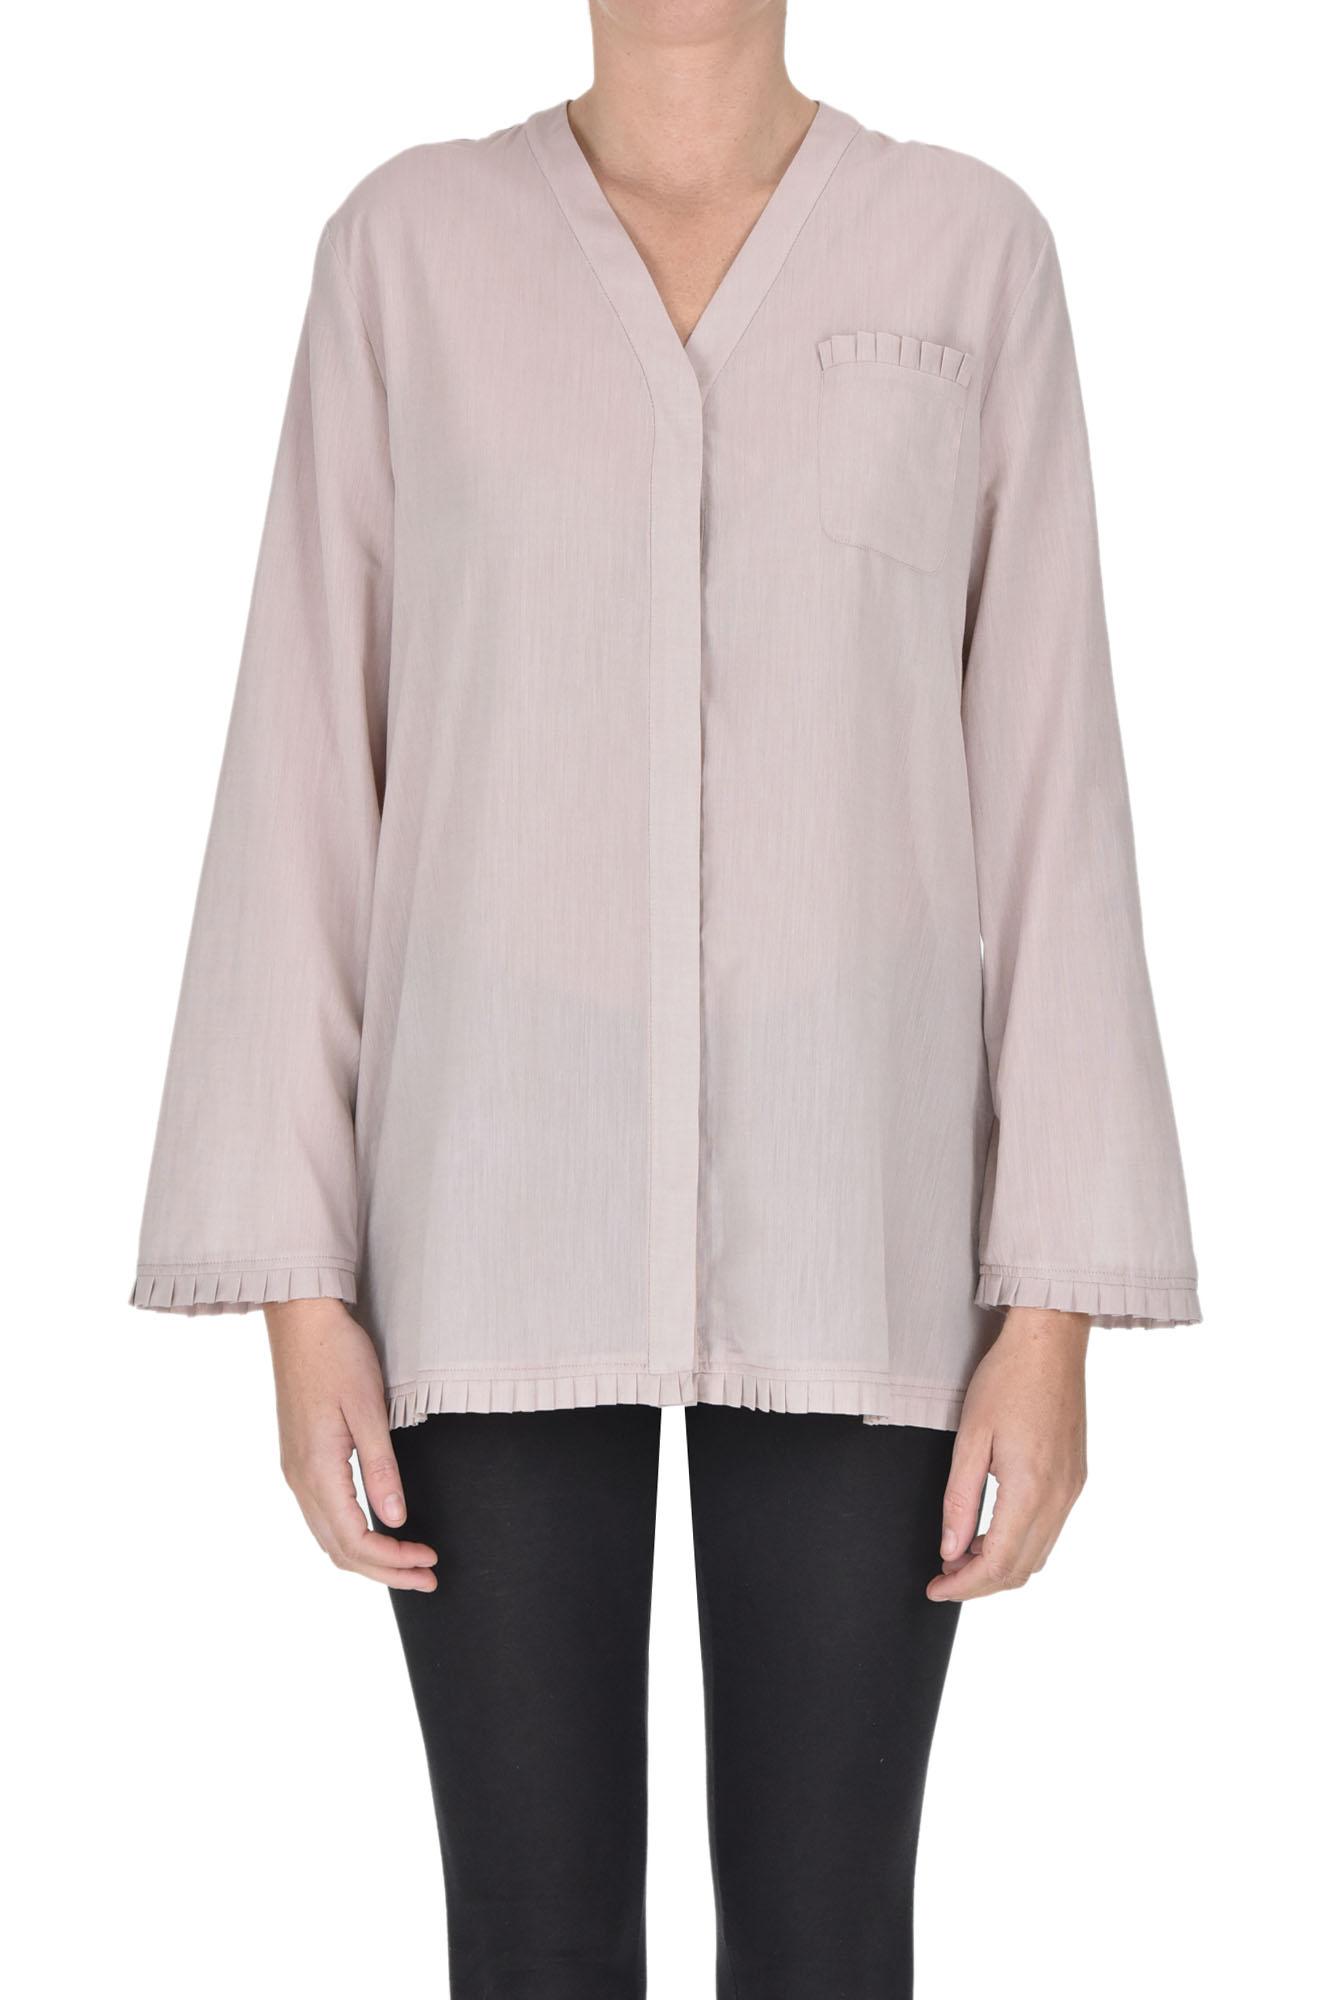 Max Mara Cluny Blouse in Pink | Lyst